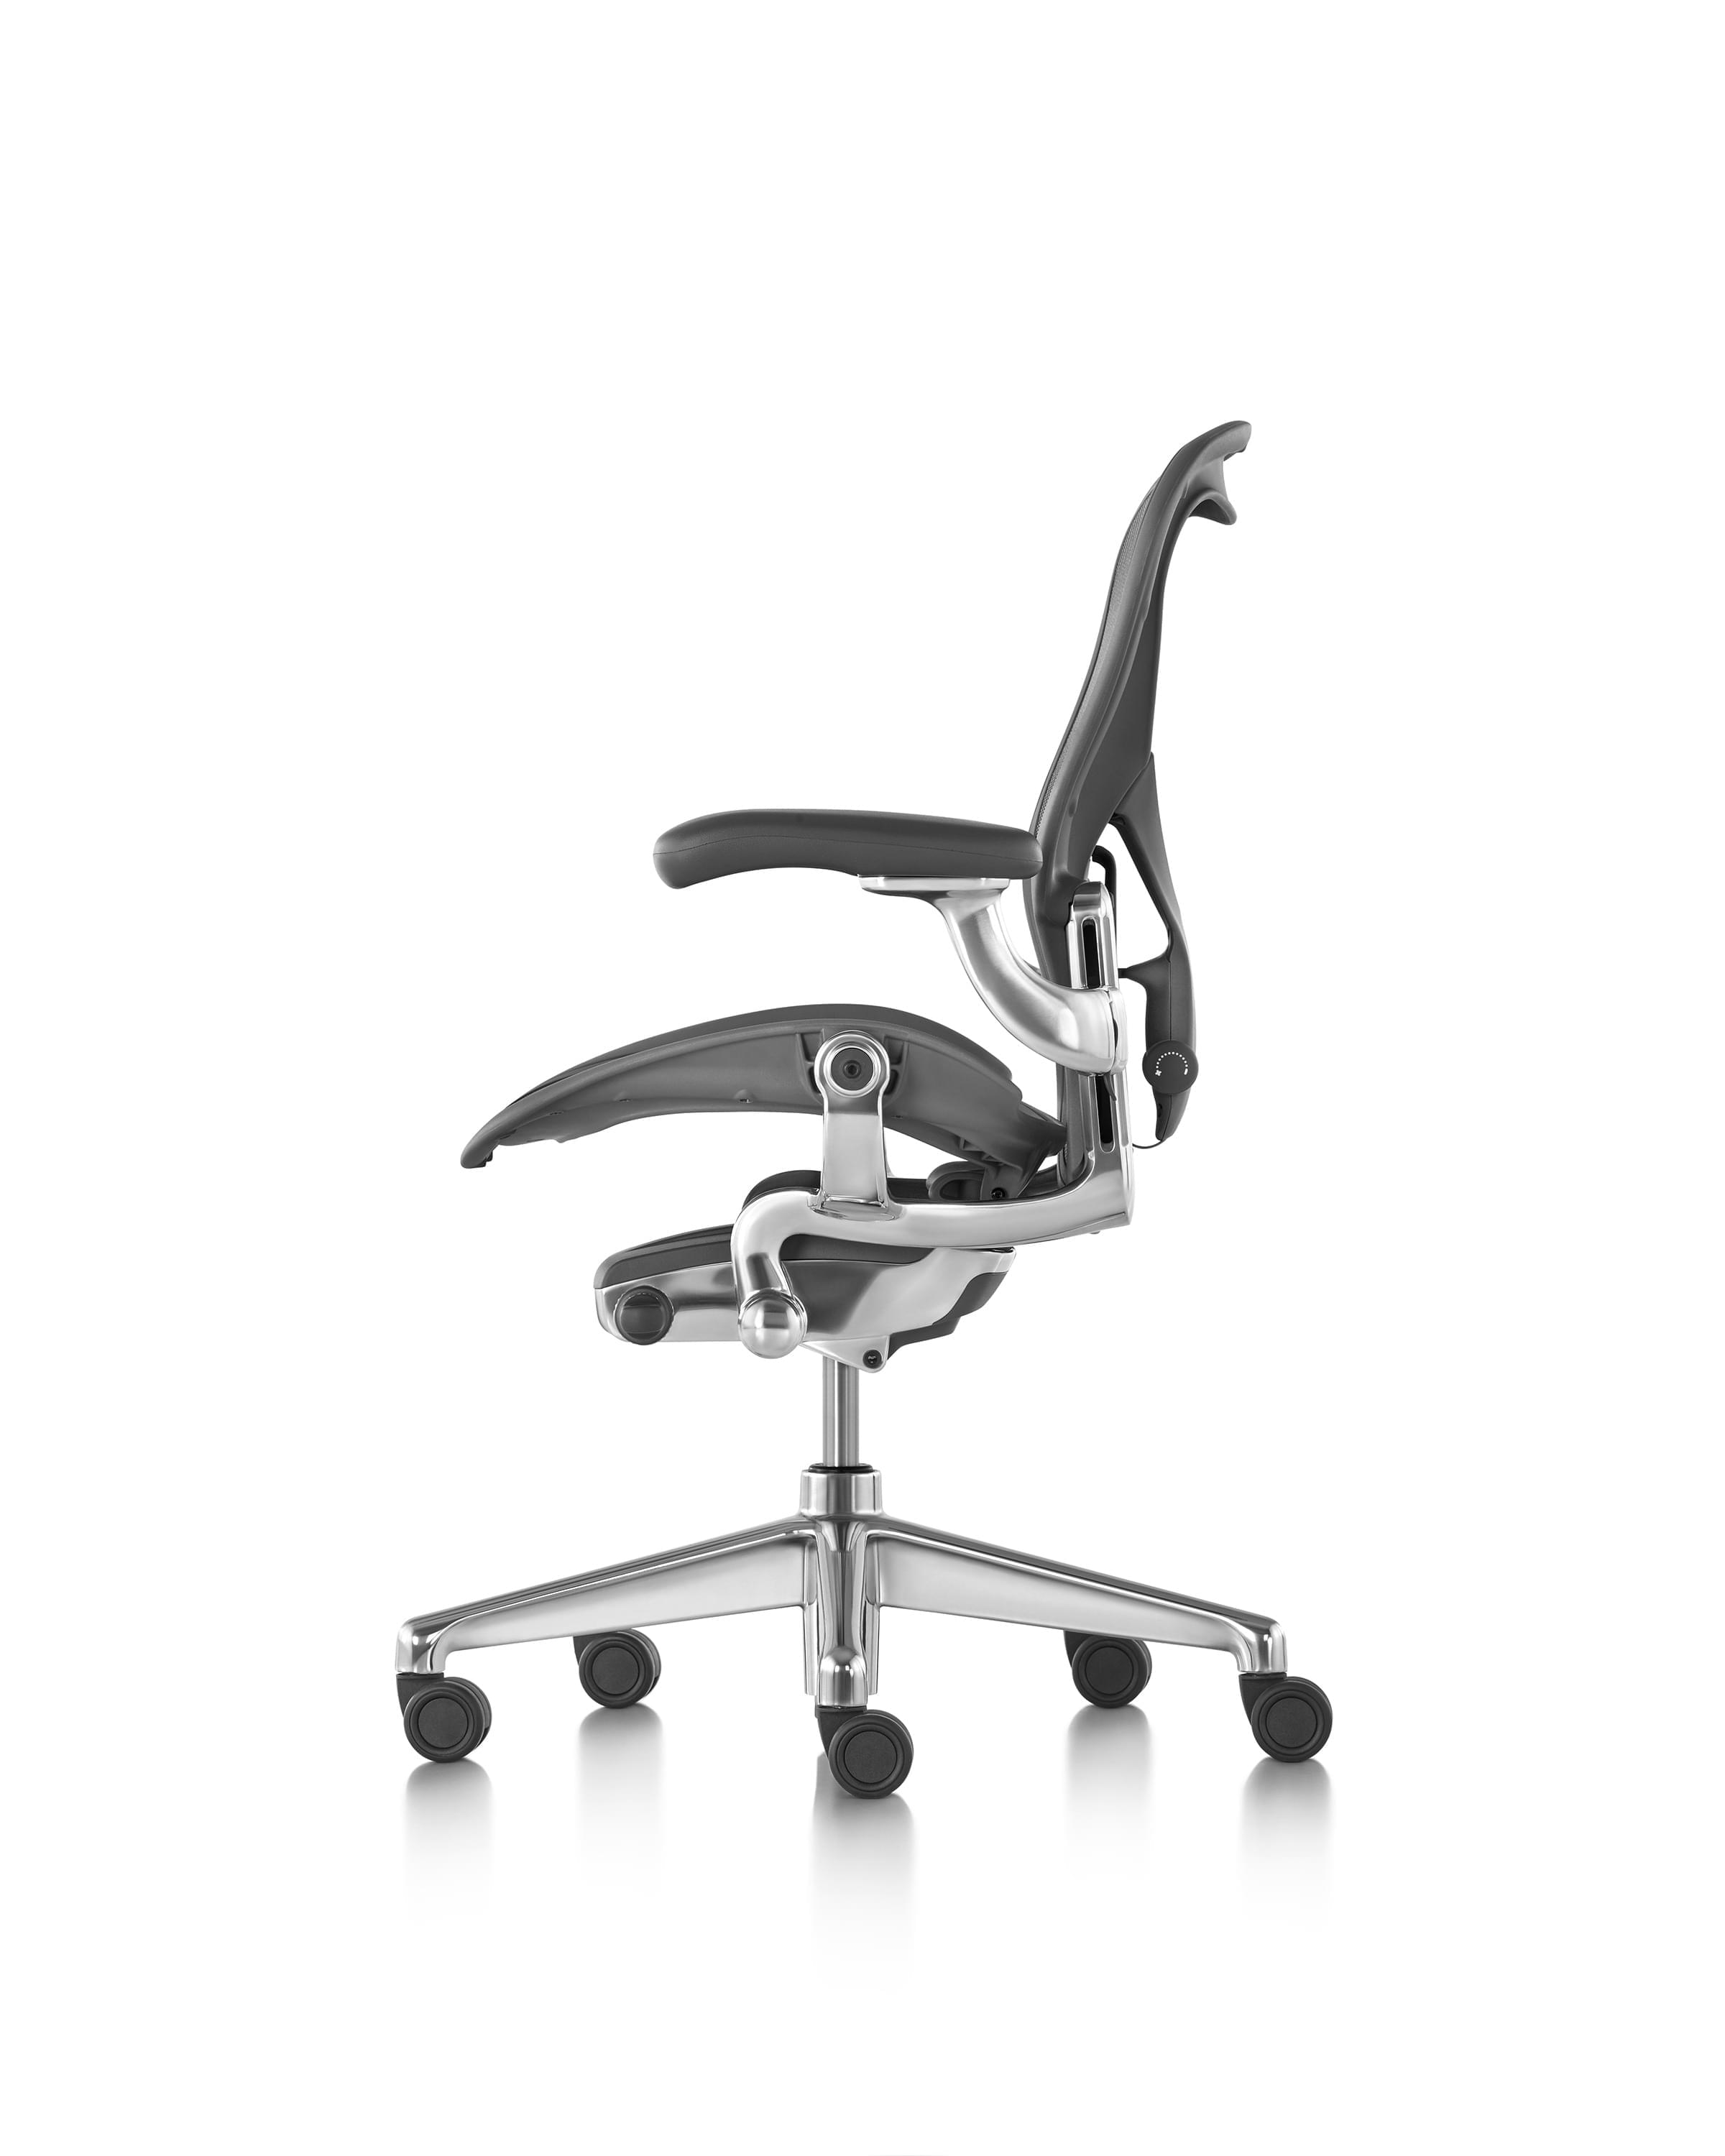 Herman Miller Aeron Chair Remastered - Carbon Frame with Polished Base & Linkageemastered - Carbon Framne with Polished Base & Linkage